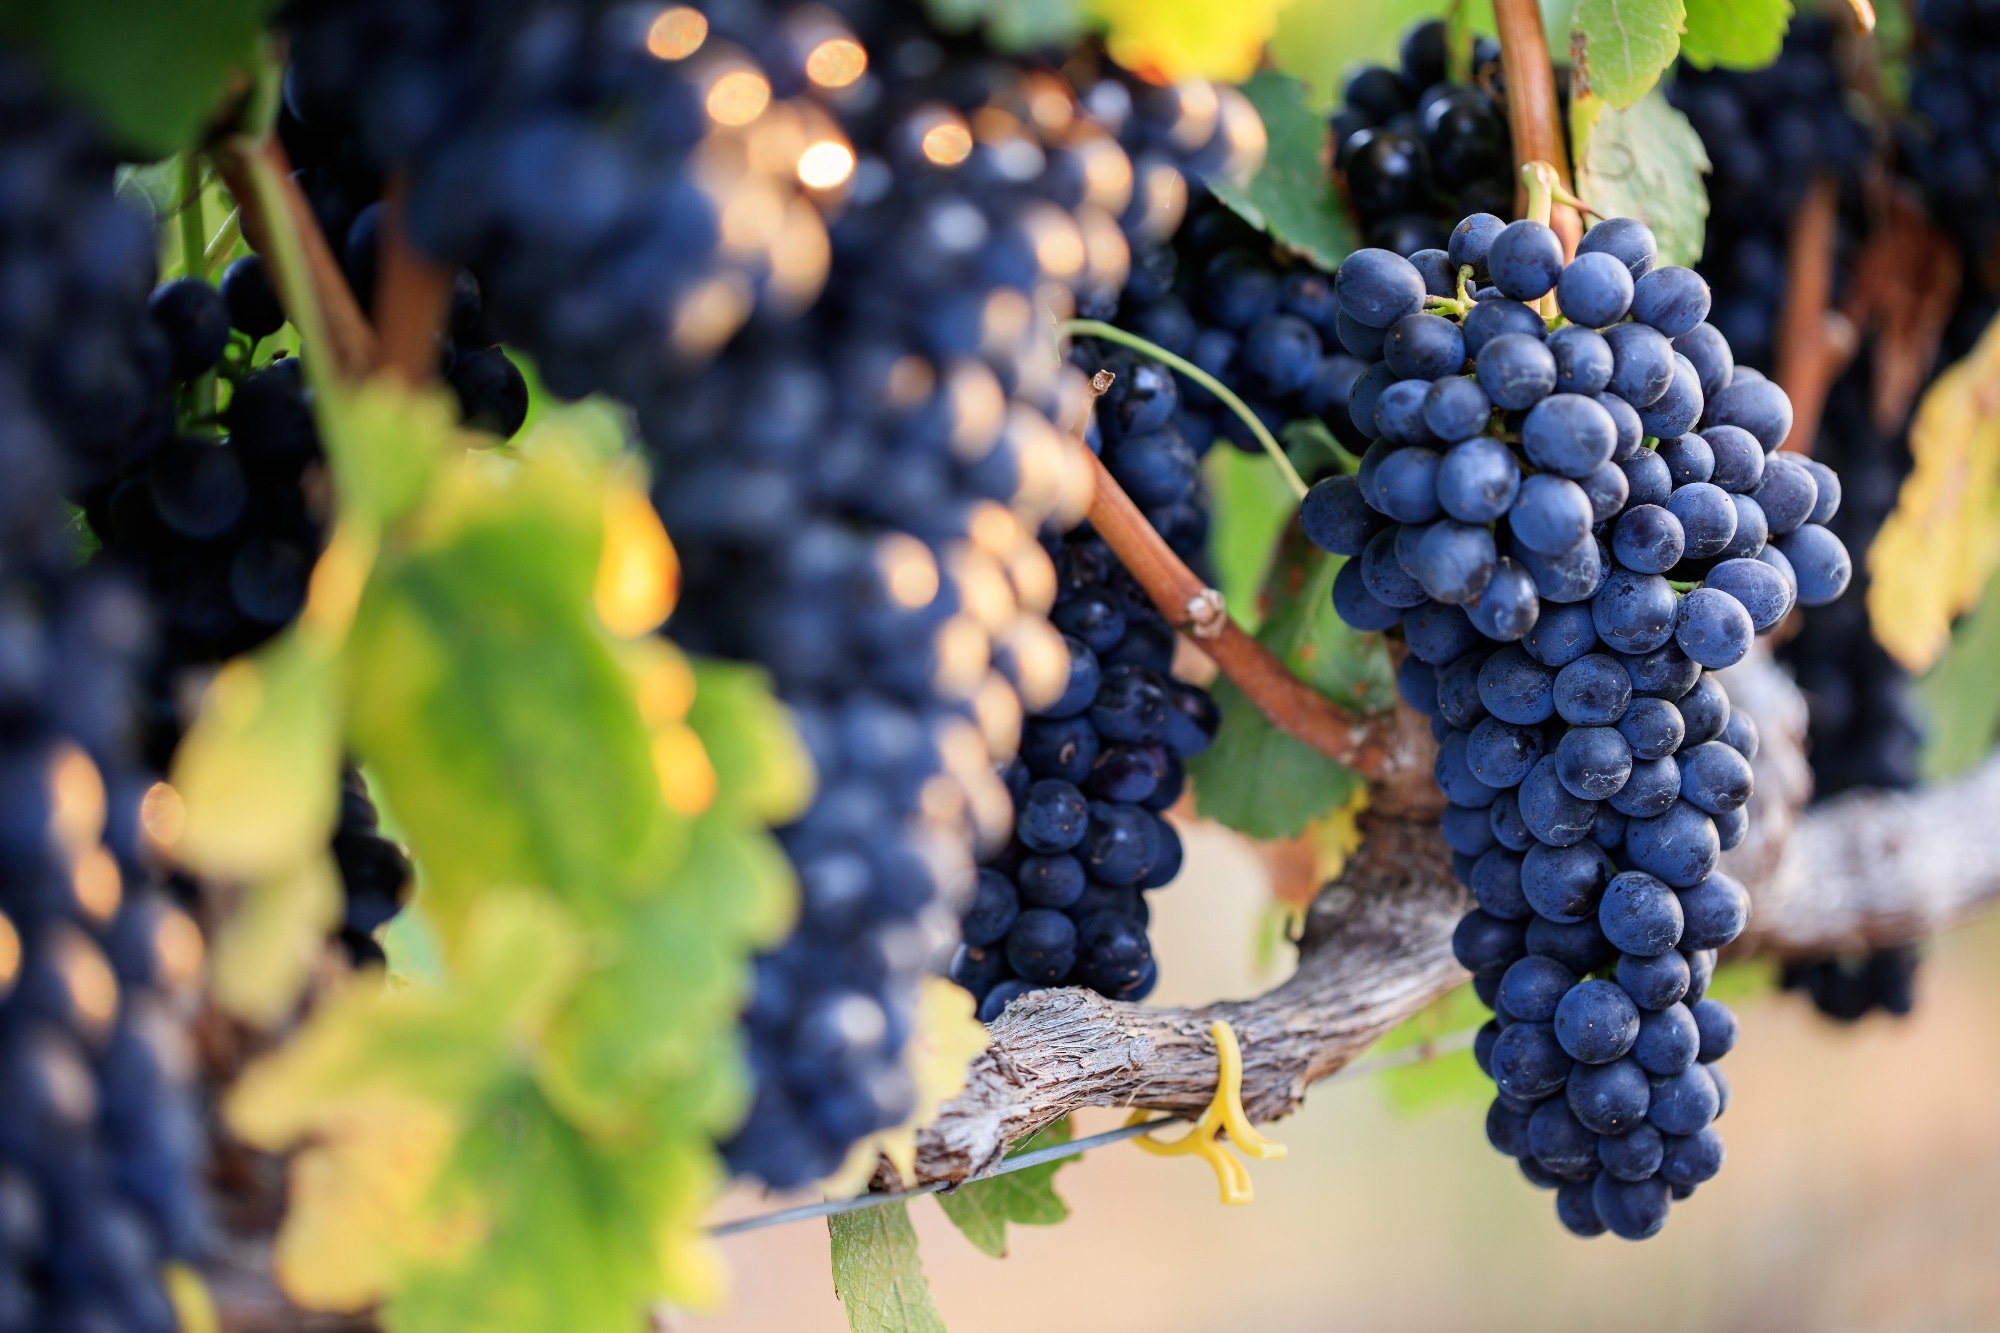 Study: Influence of grape consumption on the human microbiome. Image Credit: Andrew Hagan / Shutterstock.com